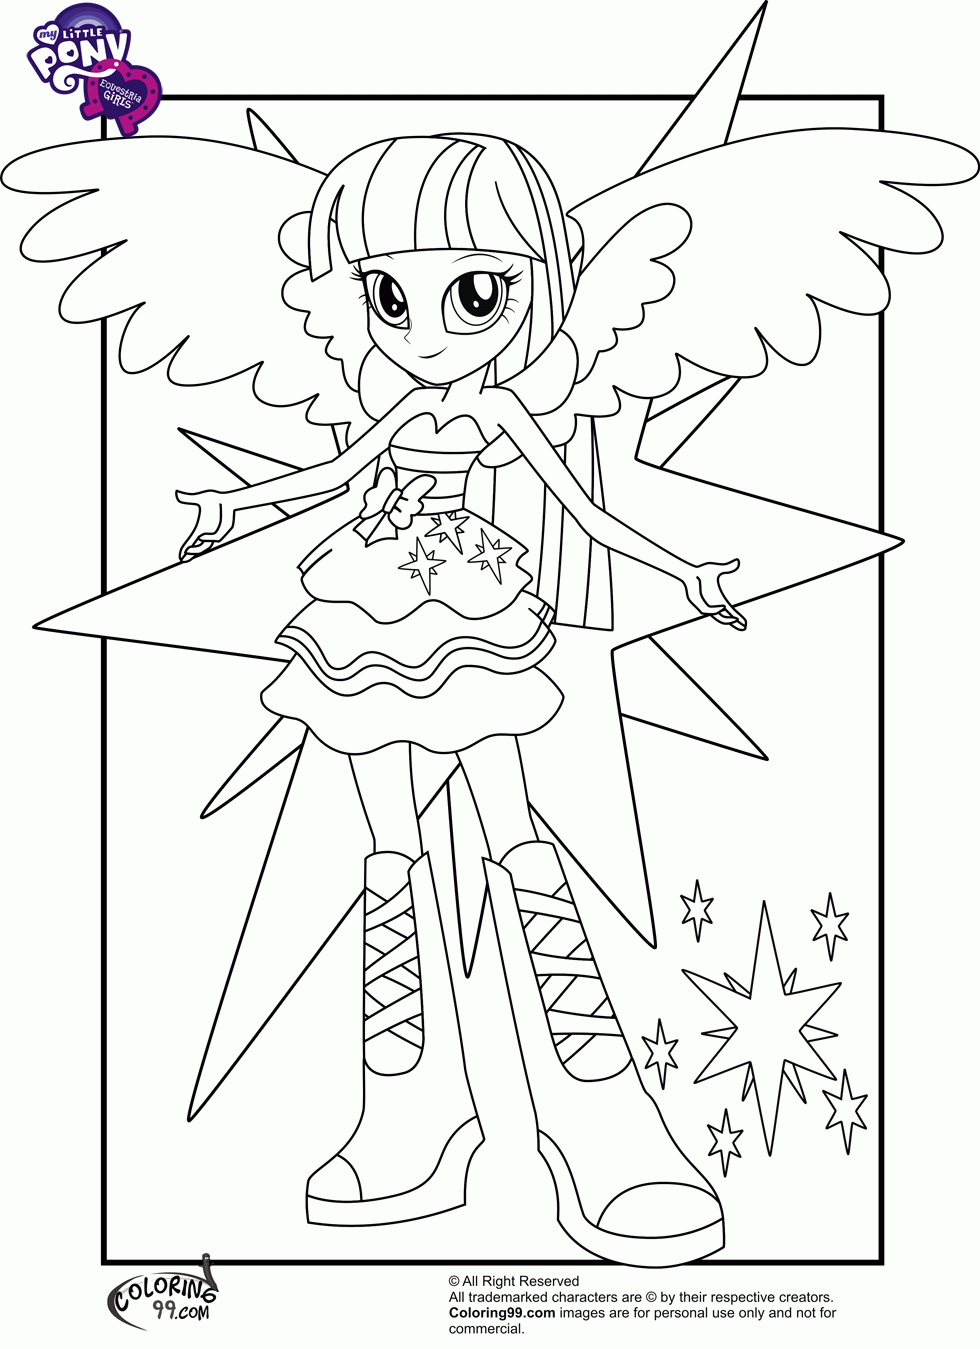 12 Pics of Human Twilight Sparkle Coloring Page - My Little Pony ...